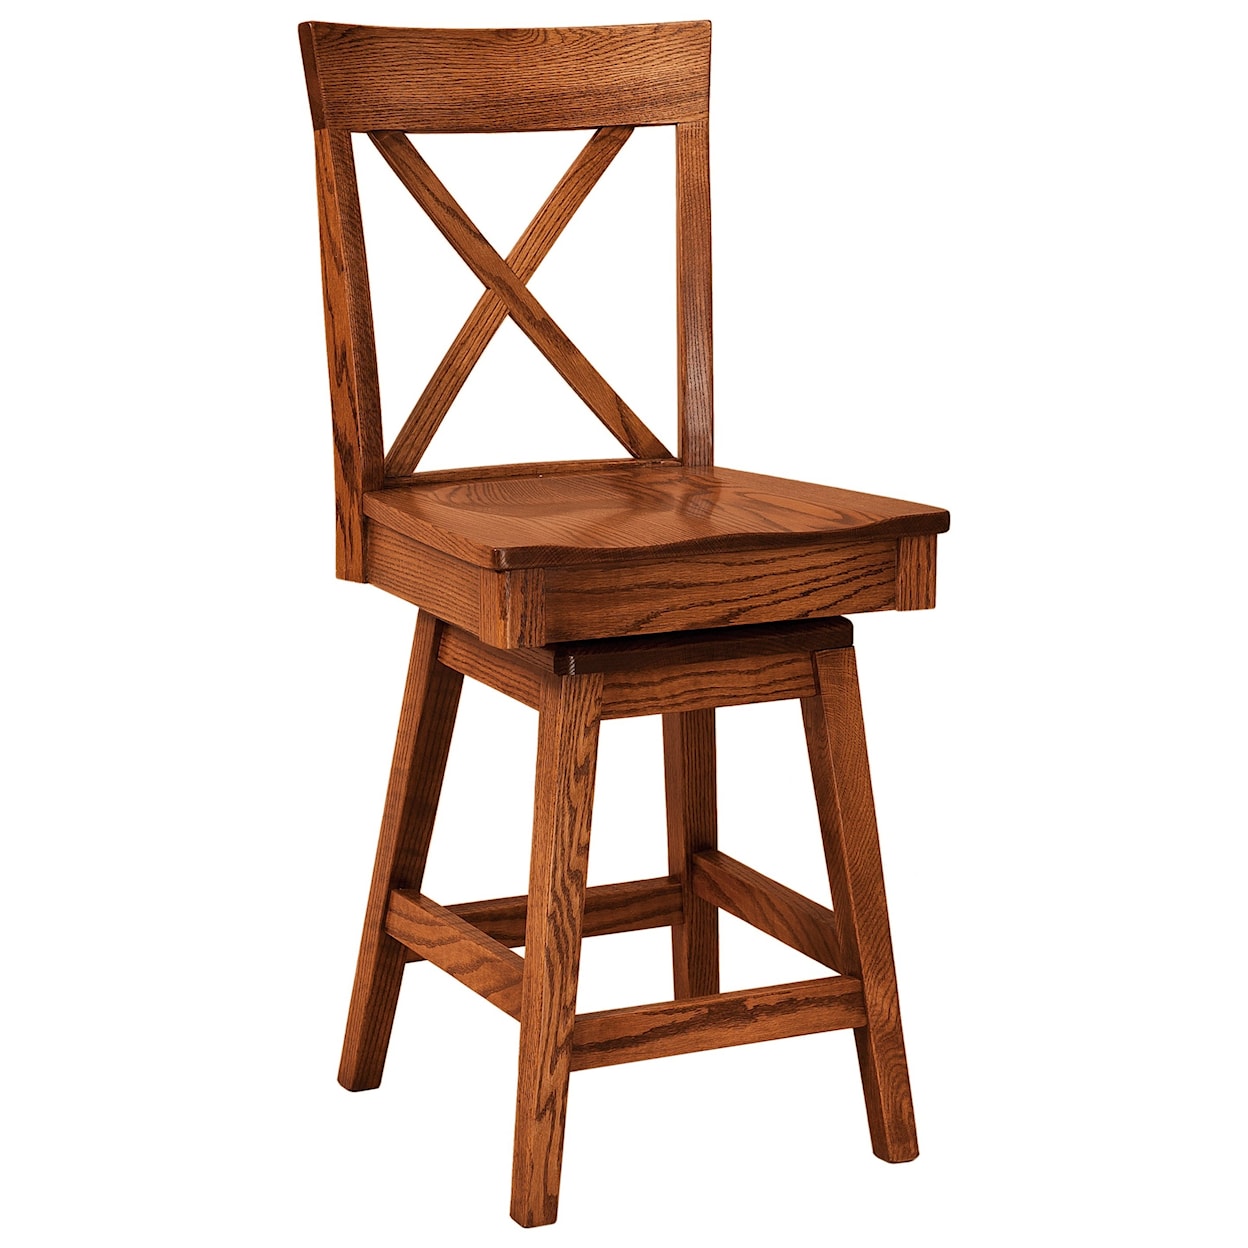 F&N Woodworking Frontier Swivel Bar Stool - Fabric Seat